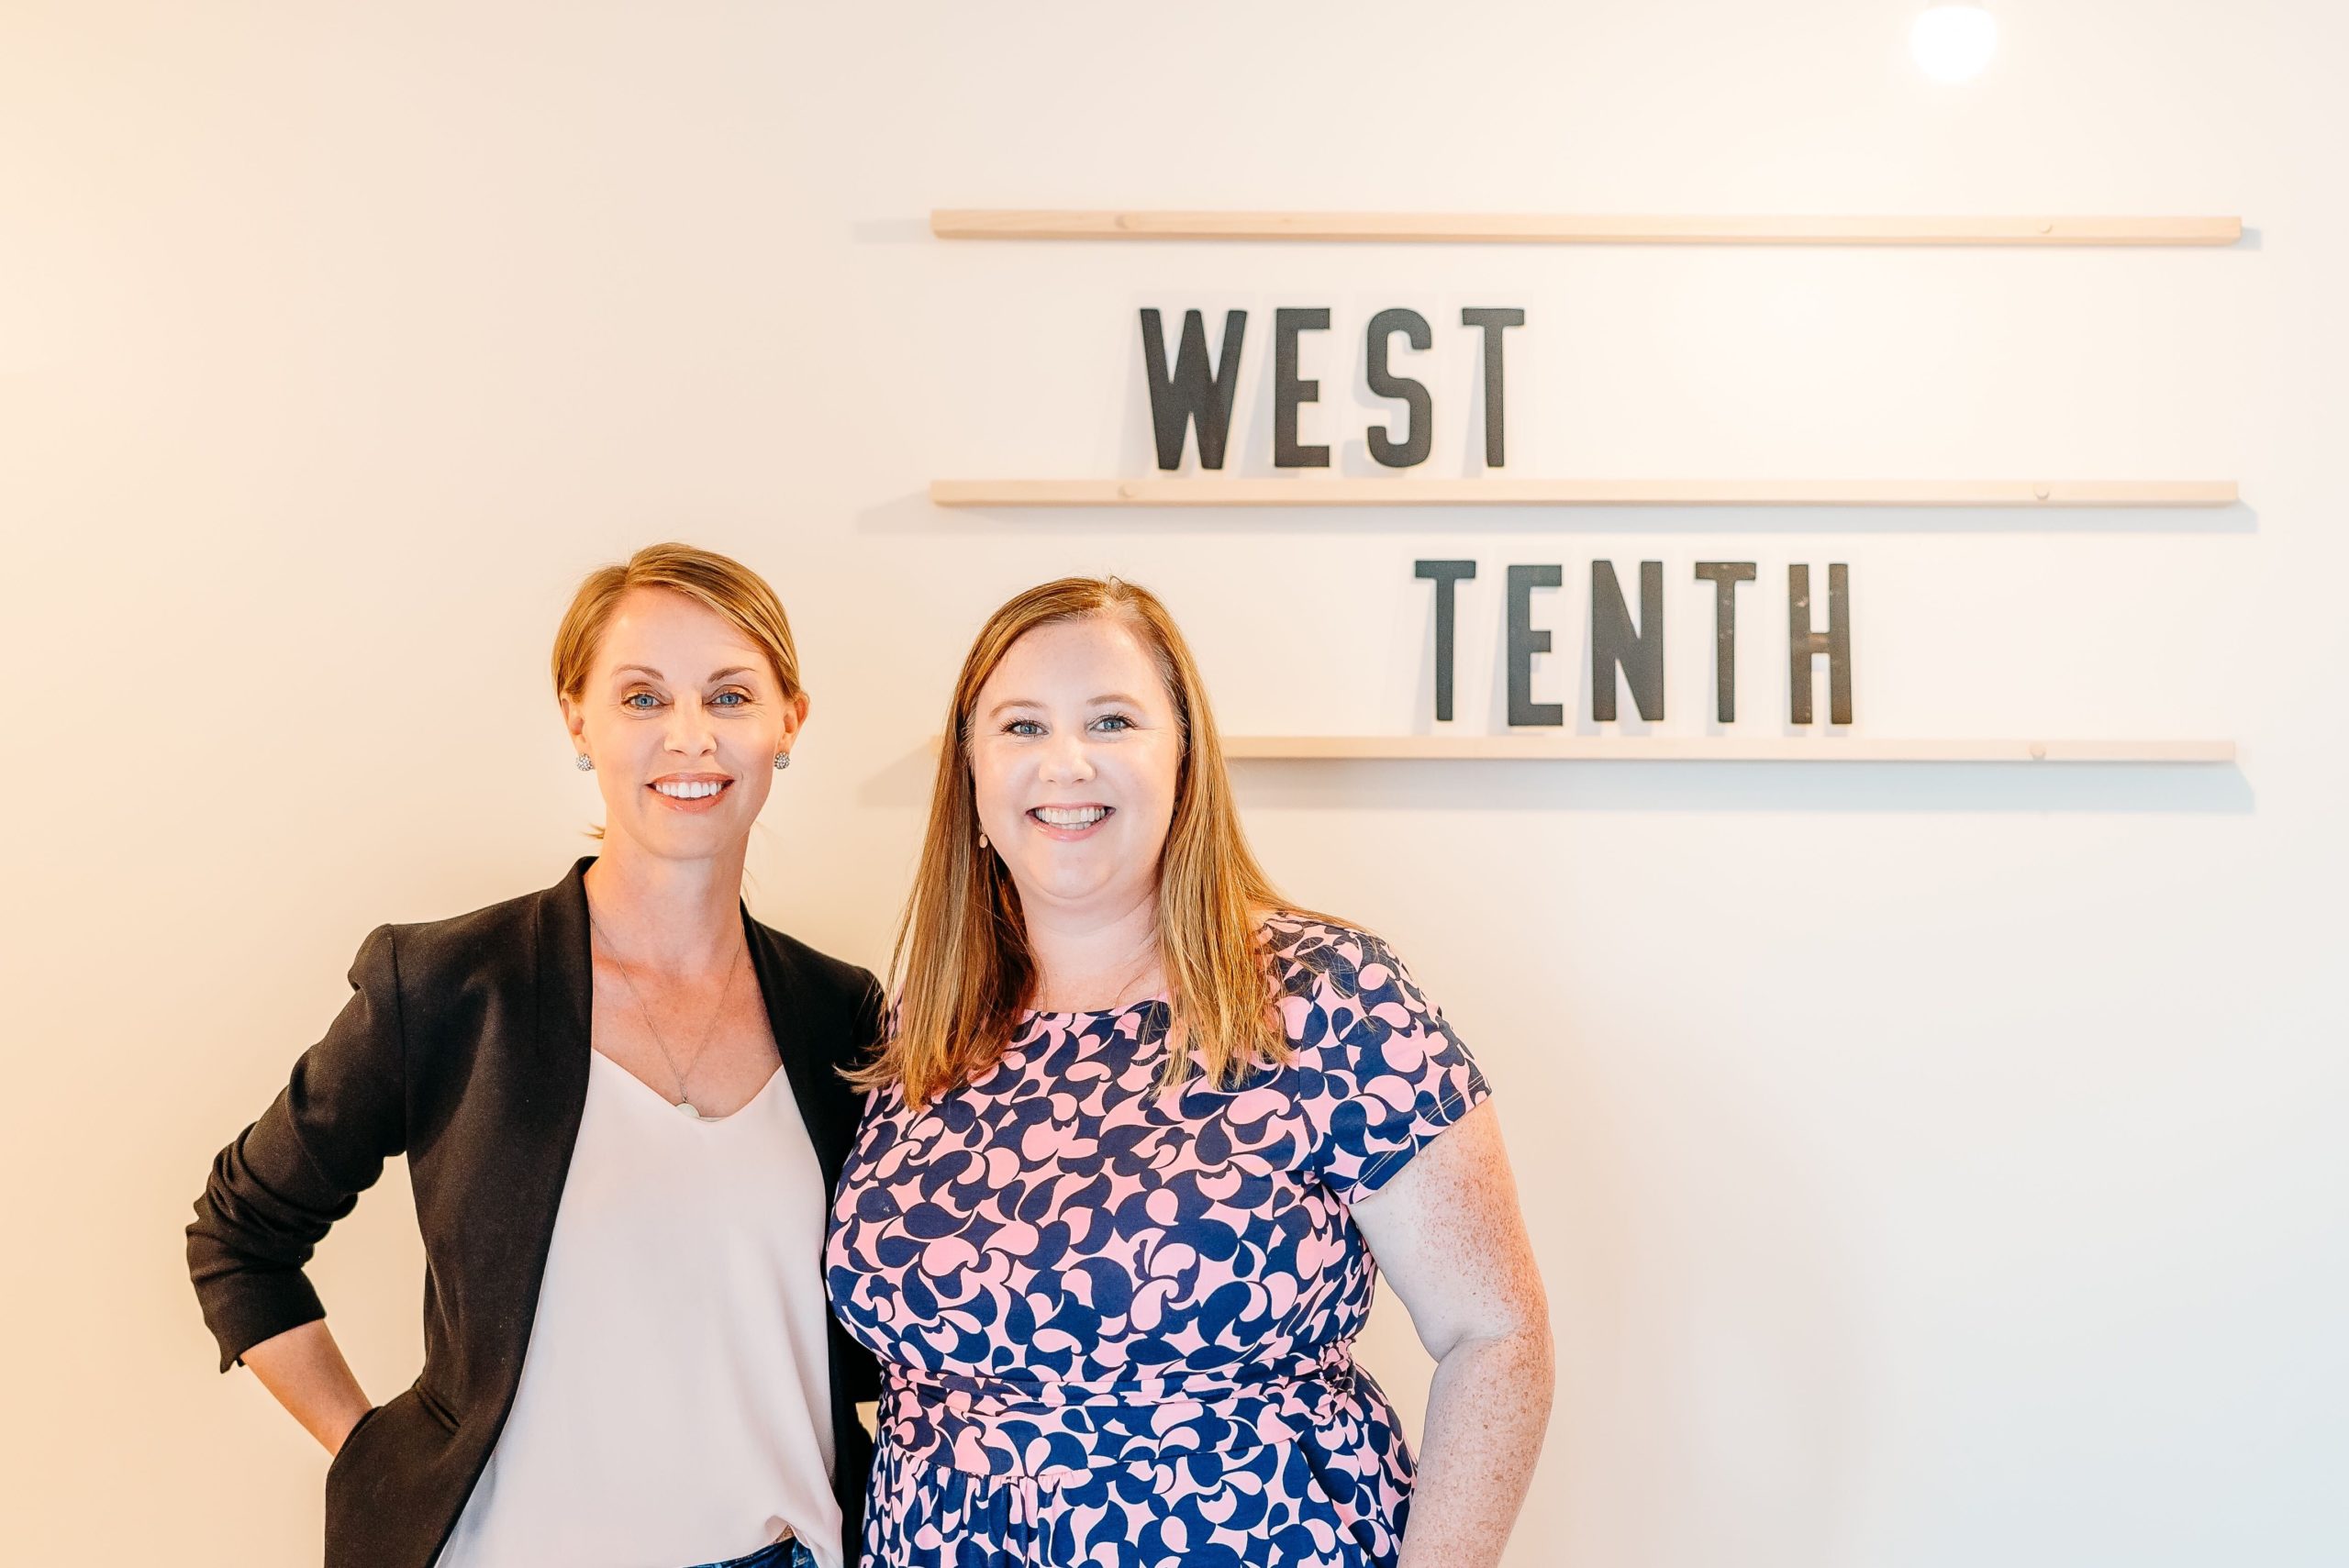 W Tenth Raises $1.5 Million to Promote Women-Owned Businesses